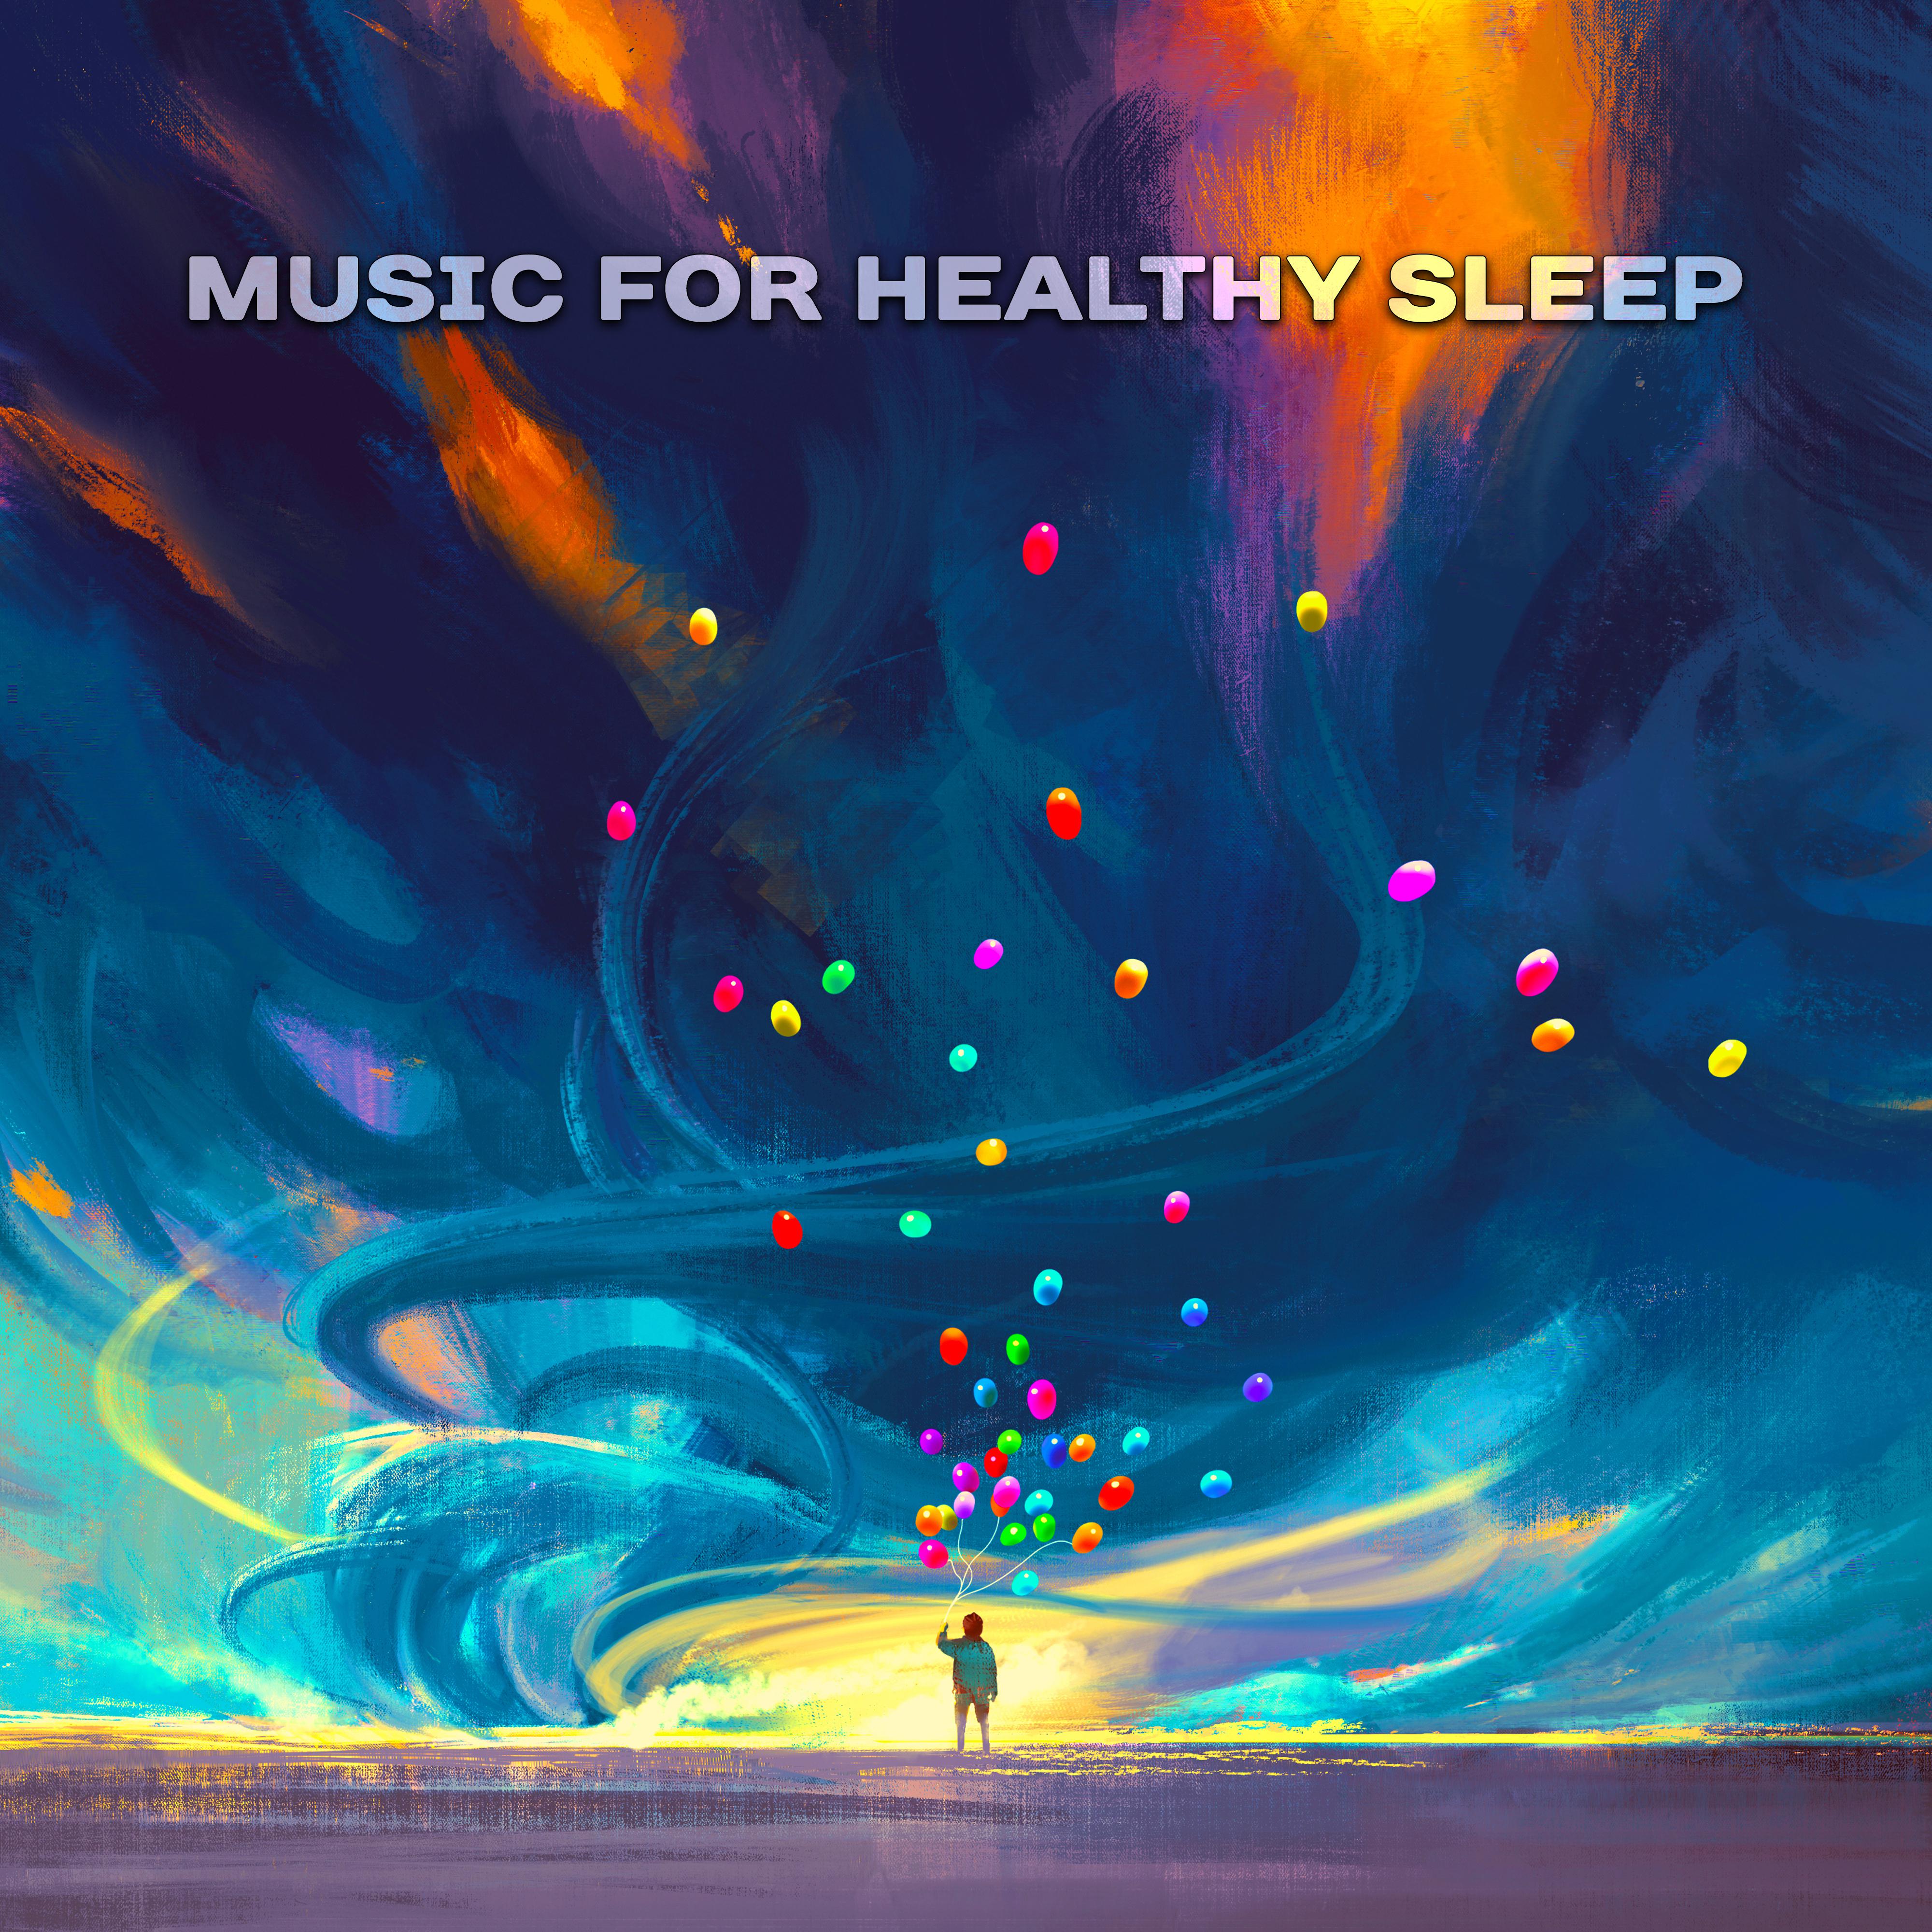 Music for Healthy Sleep  Cure Insomnia with Therapy Music, Relaxing Nature Sounds, Relief Stress And Sleep Better